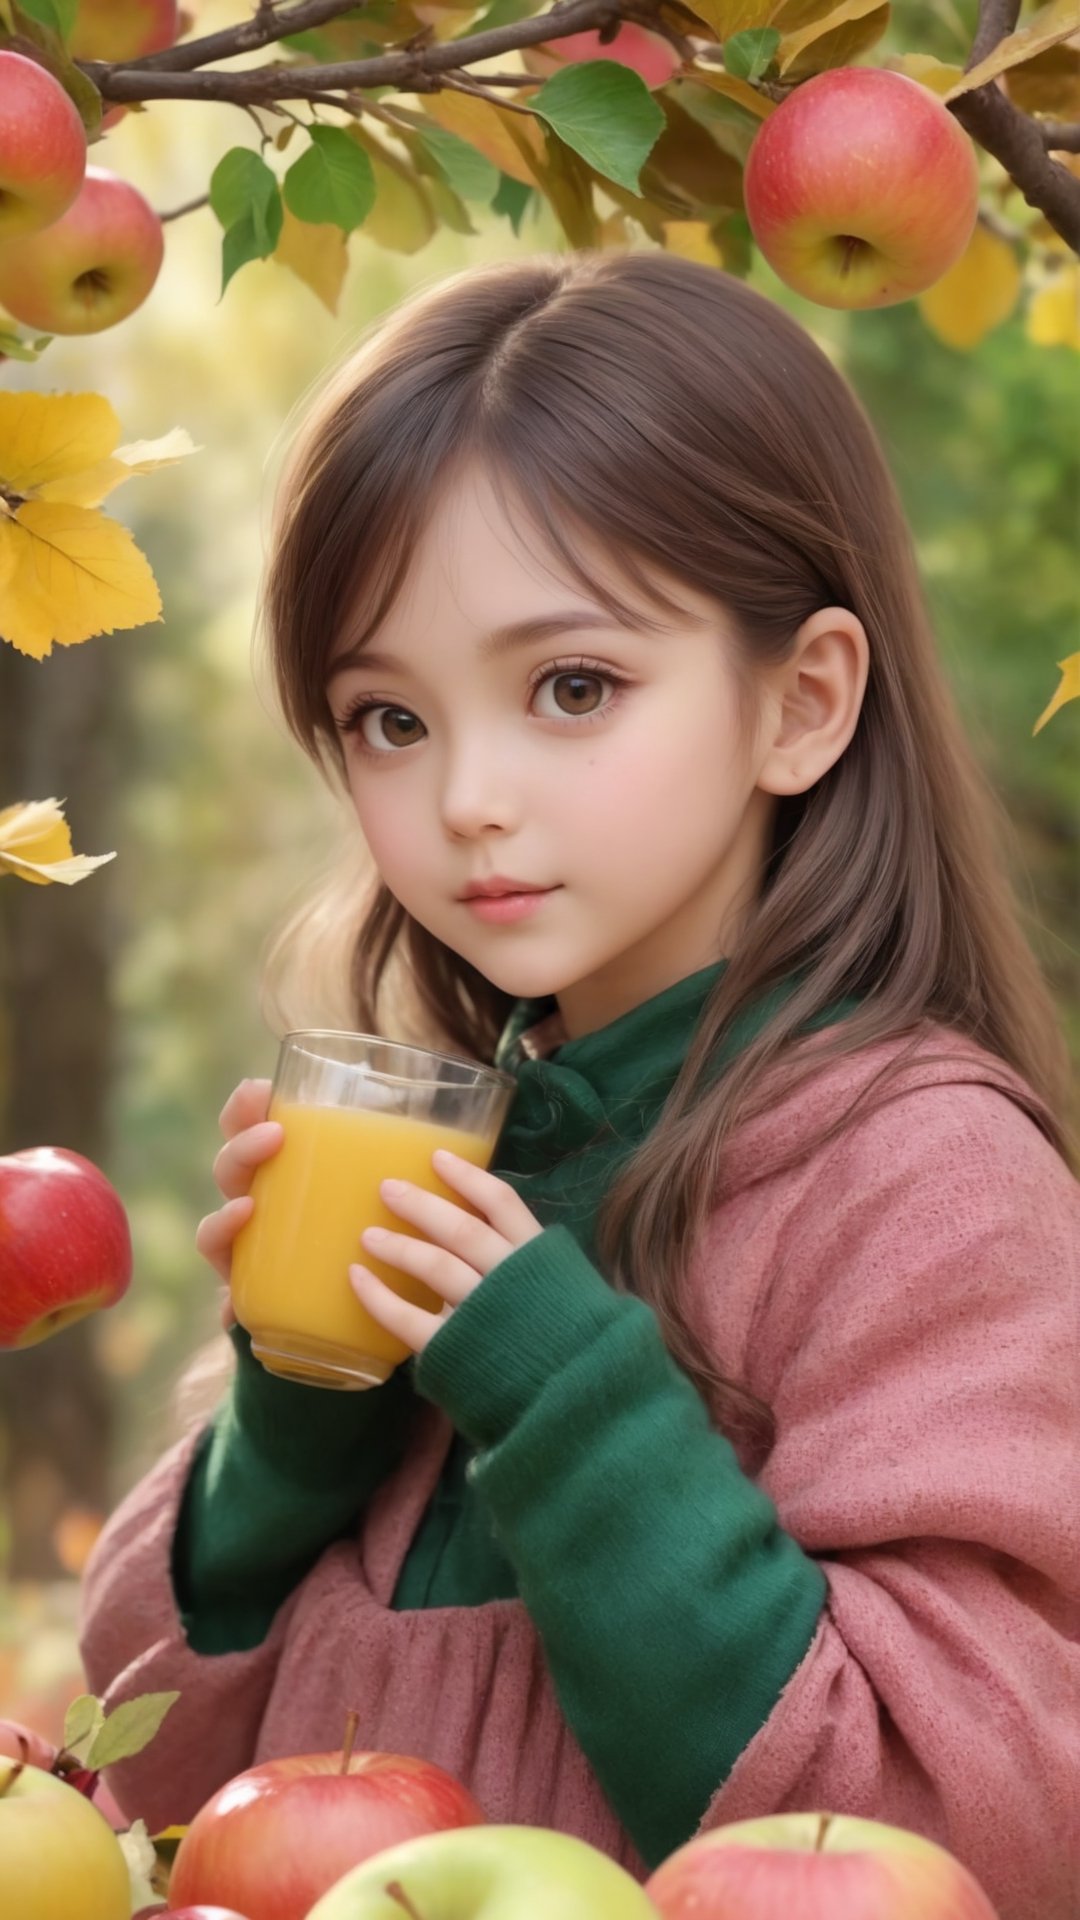 Side view, Autumn style, realistic high quality apple tree, apples full the branch, maple leaves falling, 1girl, big eyes so charming, happy,  under the tree have a table, and apples and beautiful flowers, maple leaves falling, and a adorable lovely cute big charming eyes little girl holding juice 
 near flowers, Turn around and look viewers , pink flowers blooming fantastic amazing and romantic lighting bokeh, yellow flowers blooming realistic and green plants amazing tale and lighting as background, Xxmix_Catecat